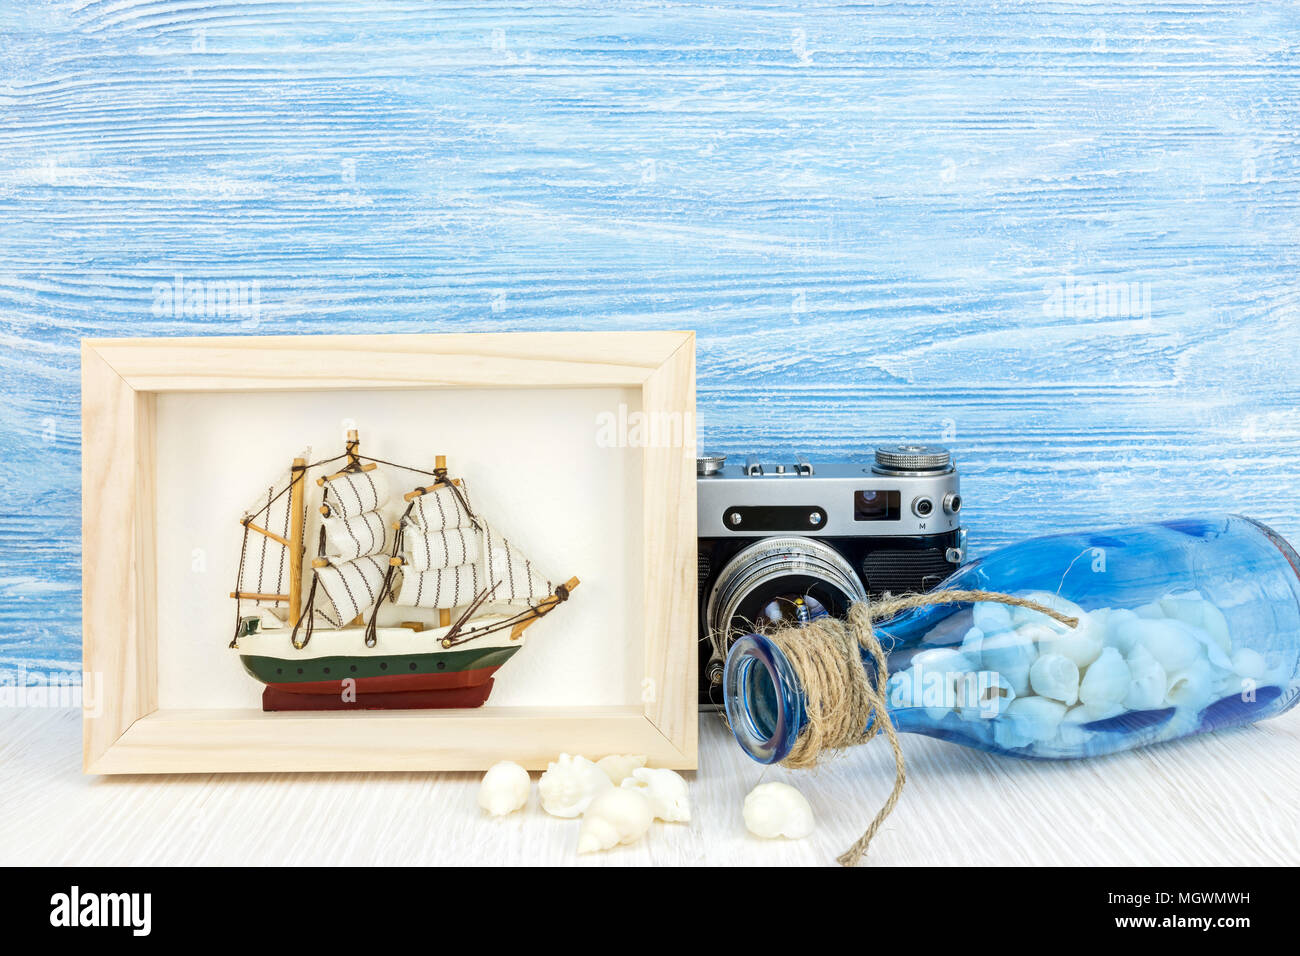 decorative marine items against blue wooden boards. summer vacation concept  Stock Photo